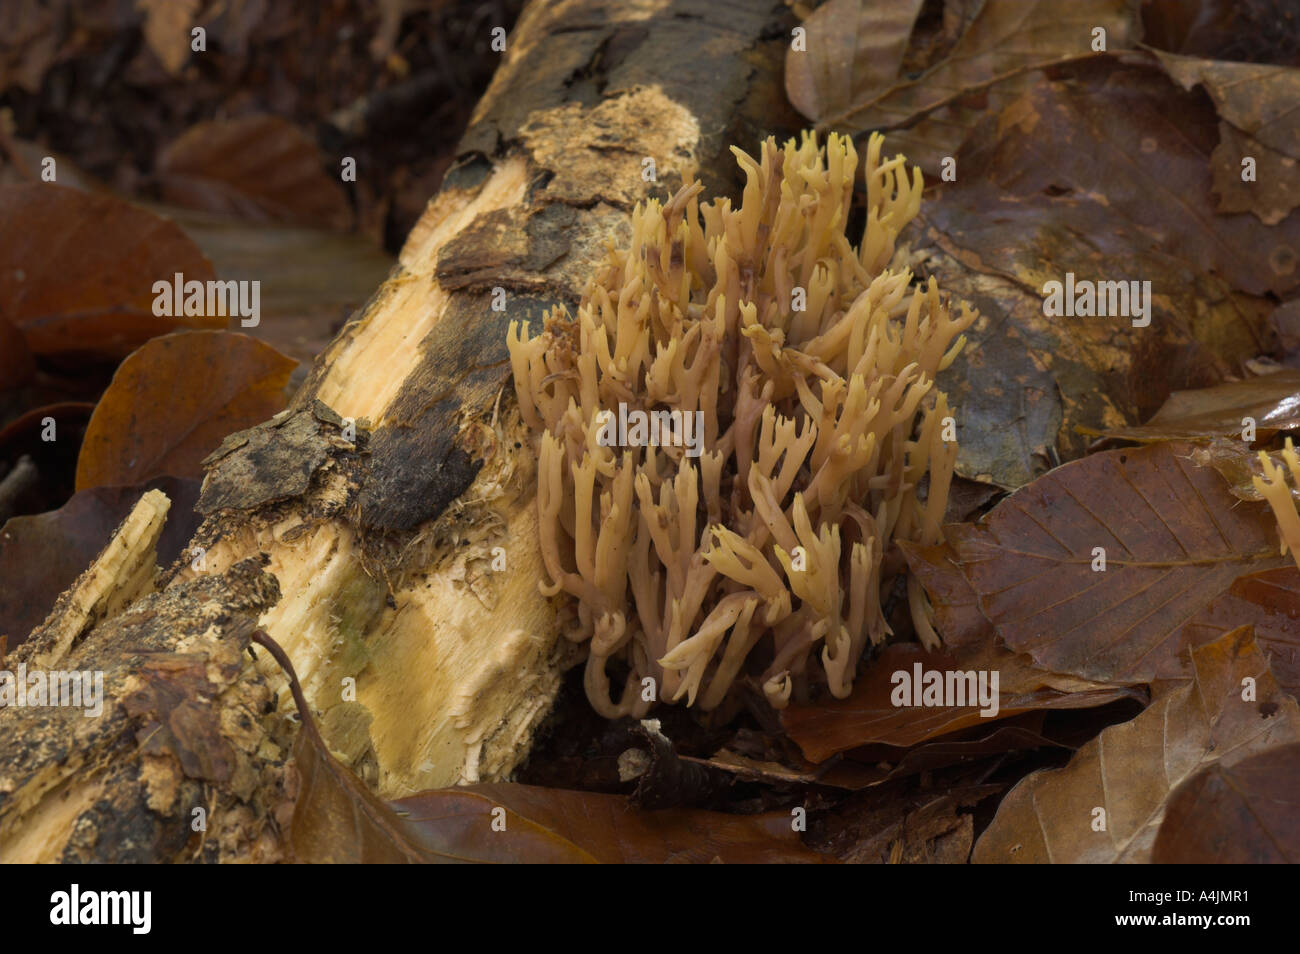 Coral fungus Ramaria sp Montseny nature reserve Spain Stock Photo